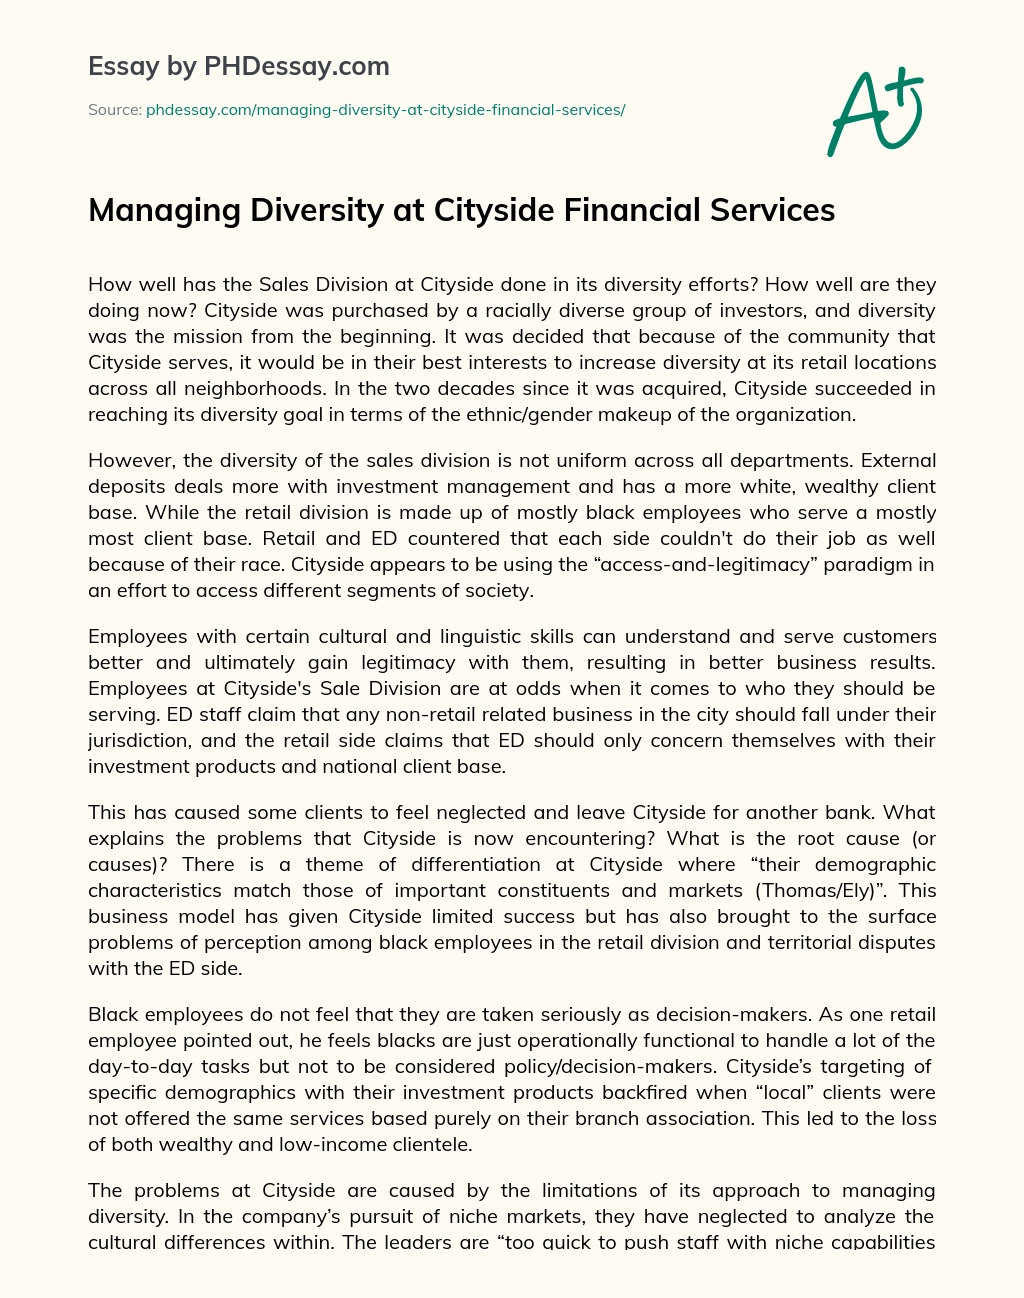 Managing Diversity at Cityside Financial Services essay